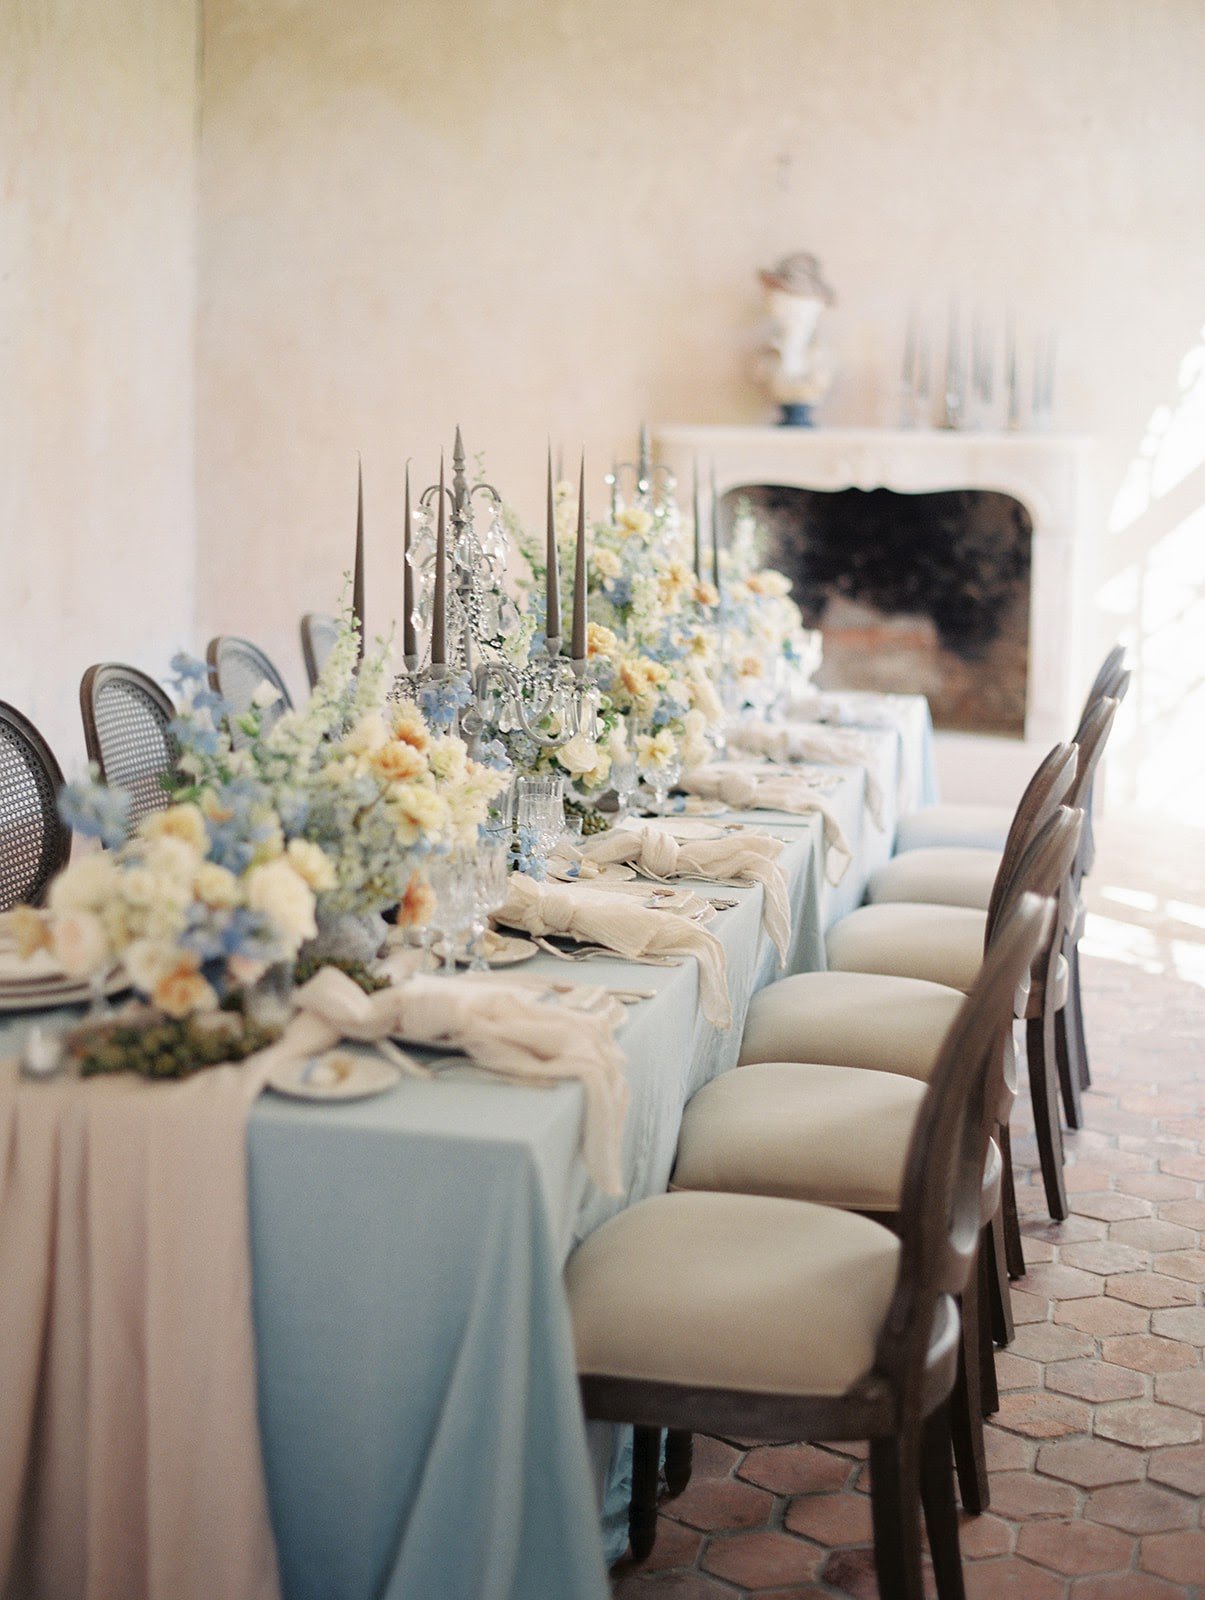 A table set for a wedding breakfast featuring  blue and white linens and pastel floral decorations at Chateau de Courtomer, a French chateau wedding venue in Normandy.